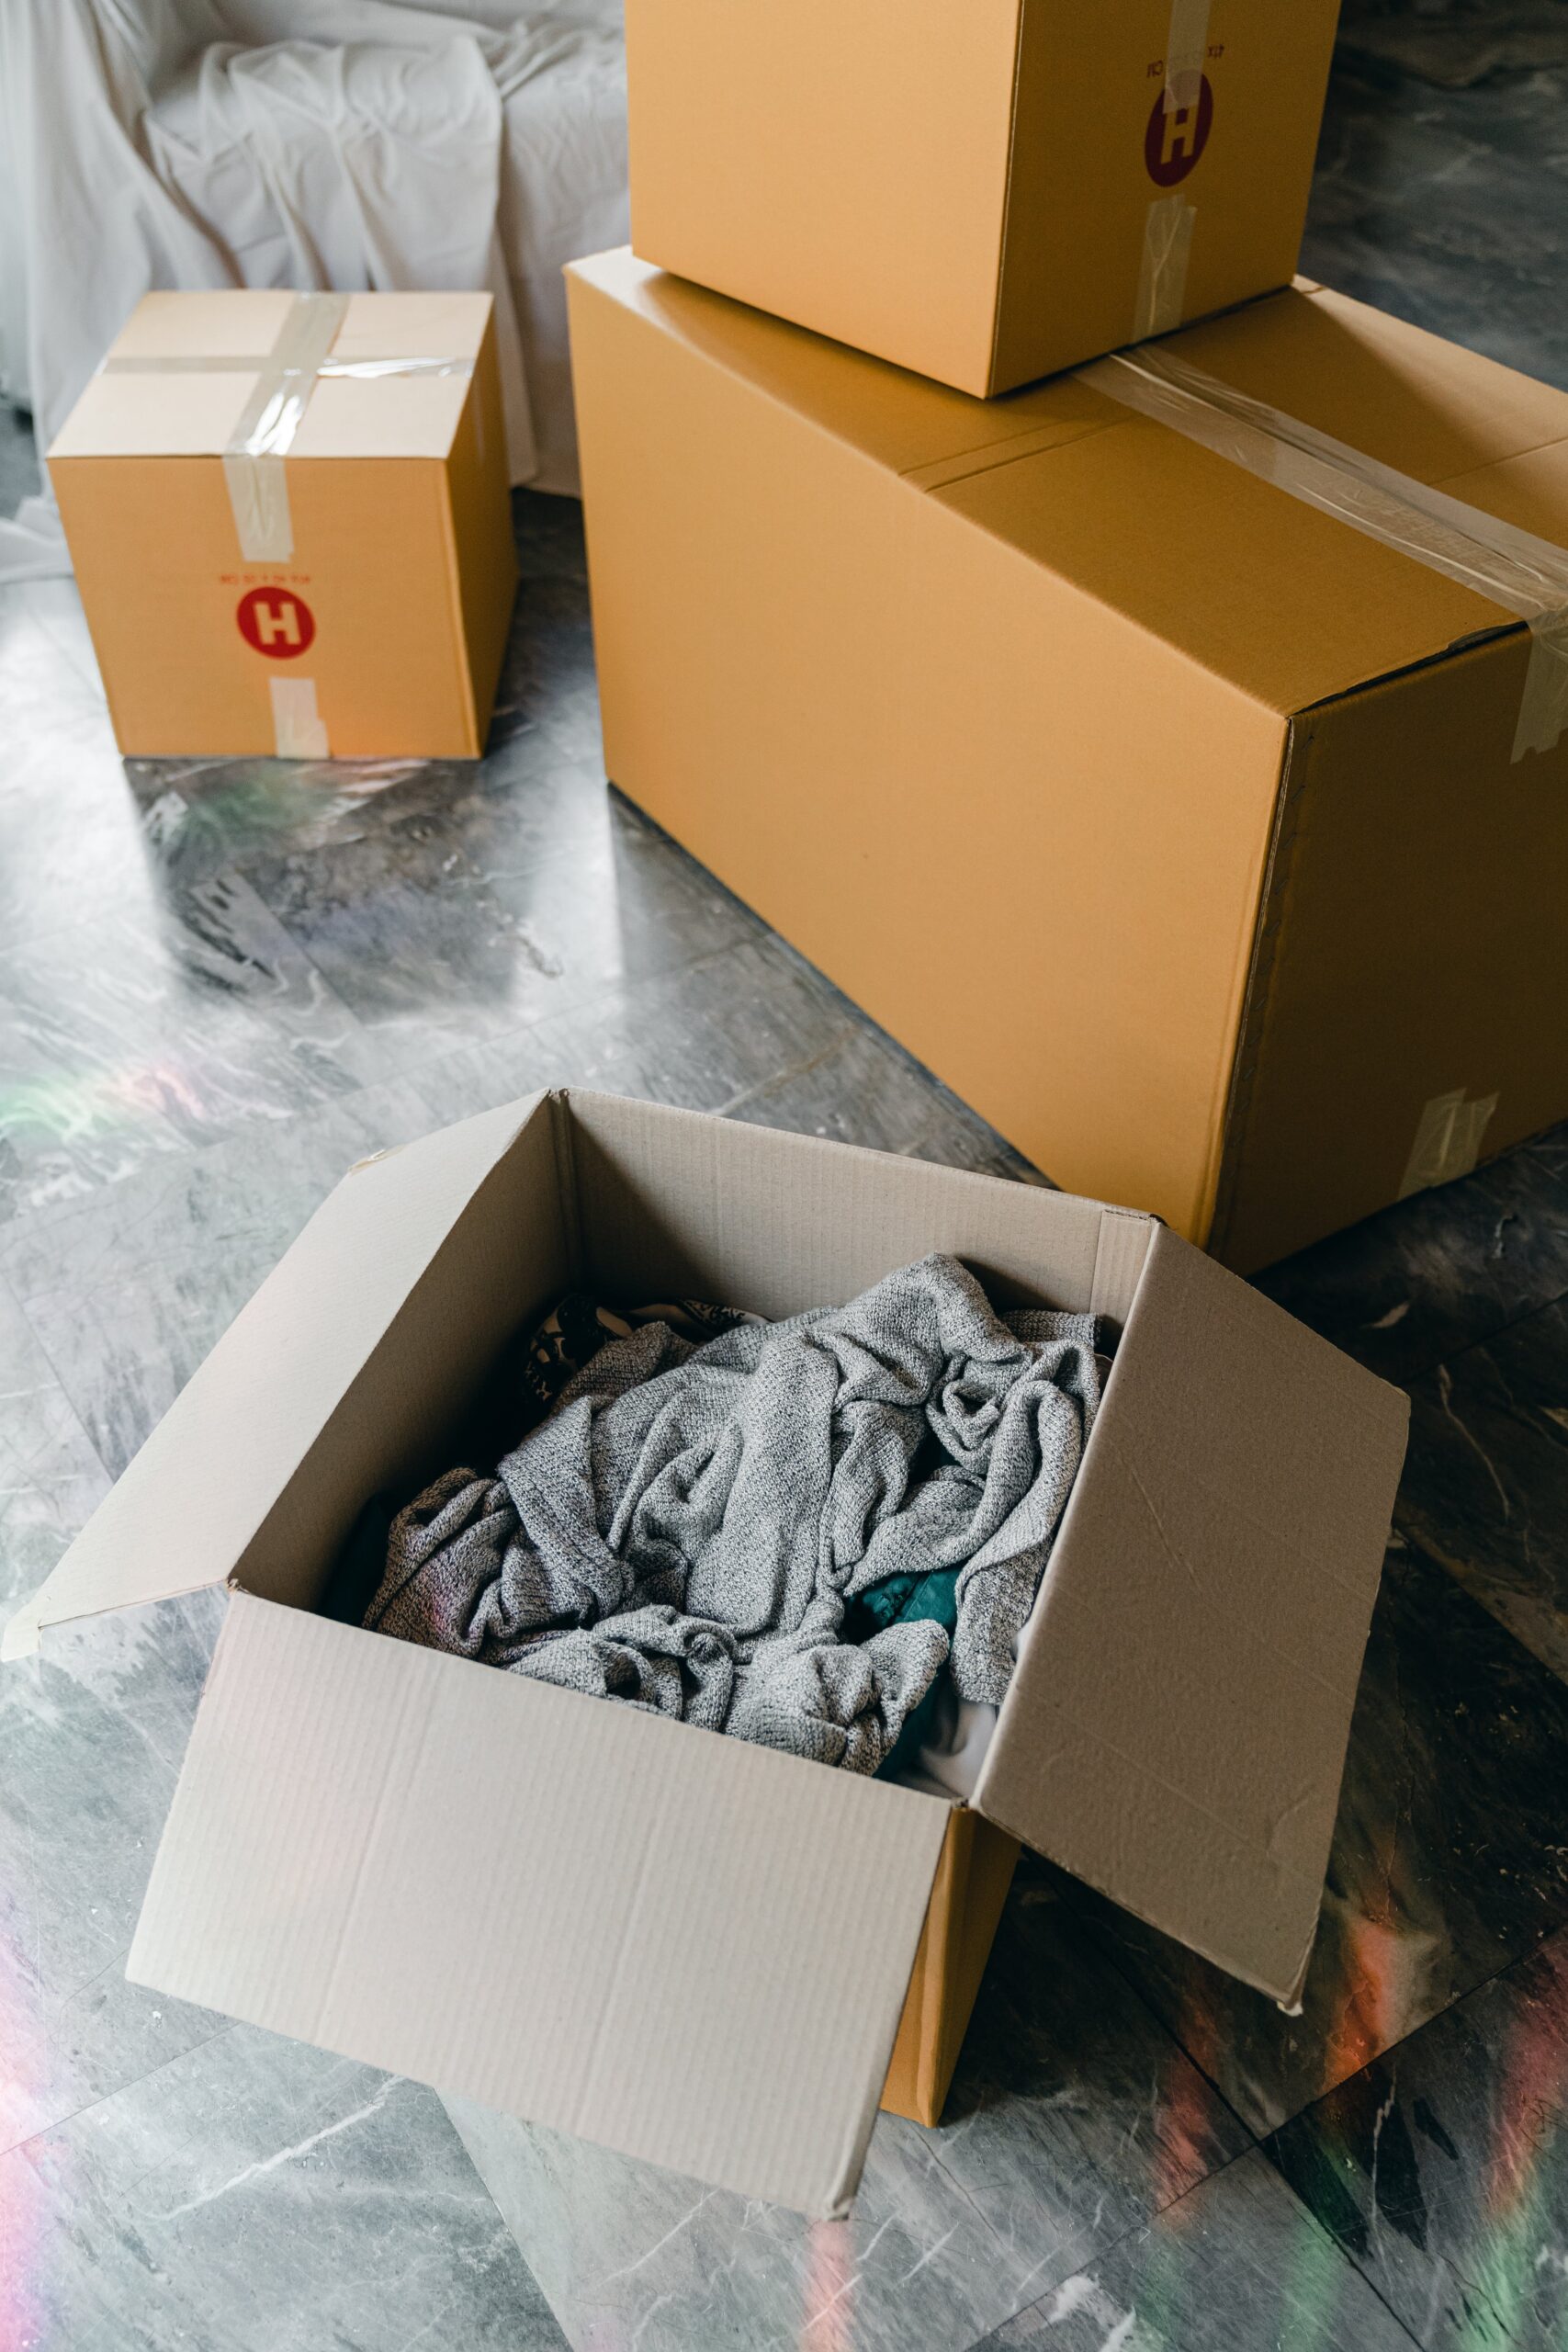 Moving boxes with clothes in them on a marble floor.